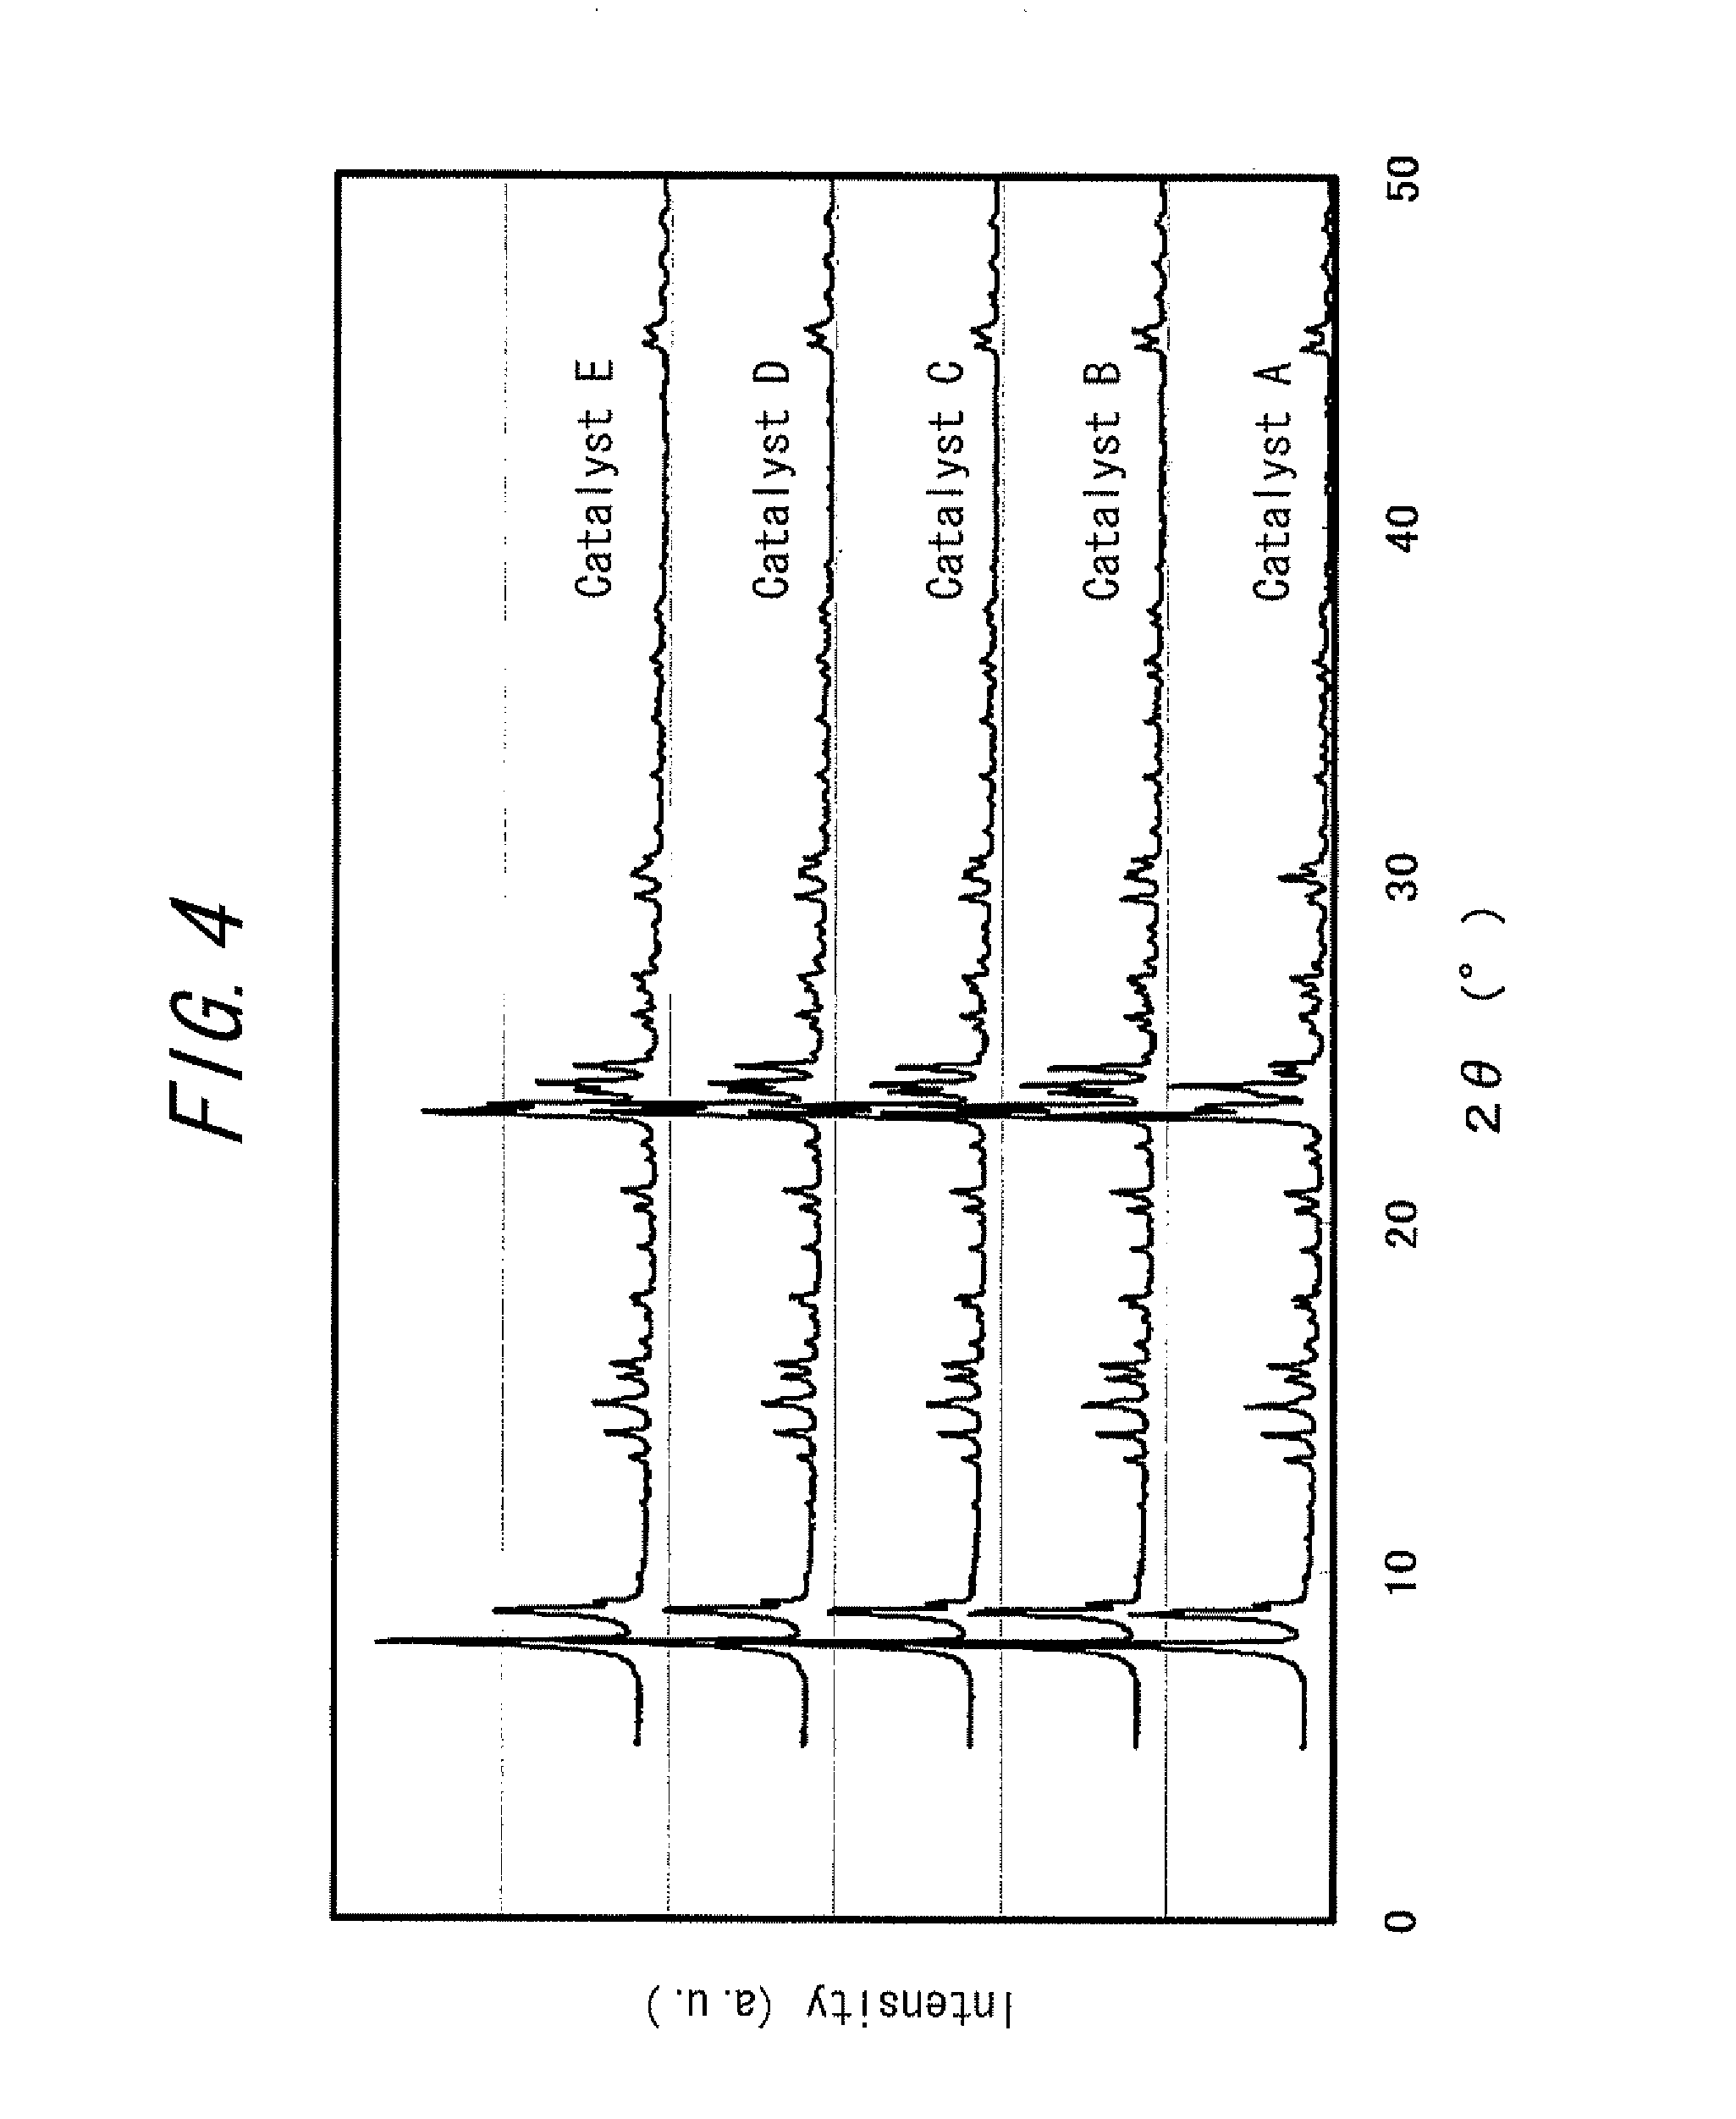 Catalyst and method for producing the same and method for producing paraxylene using the same